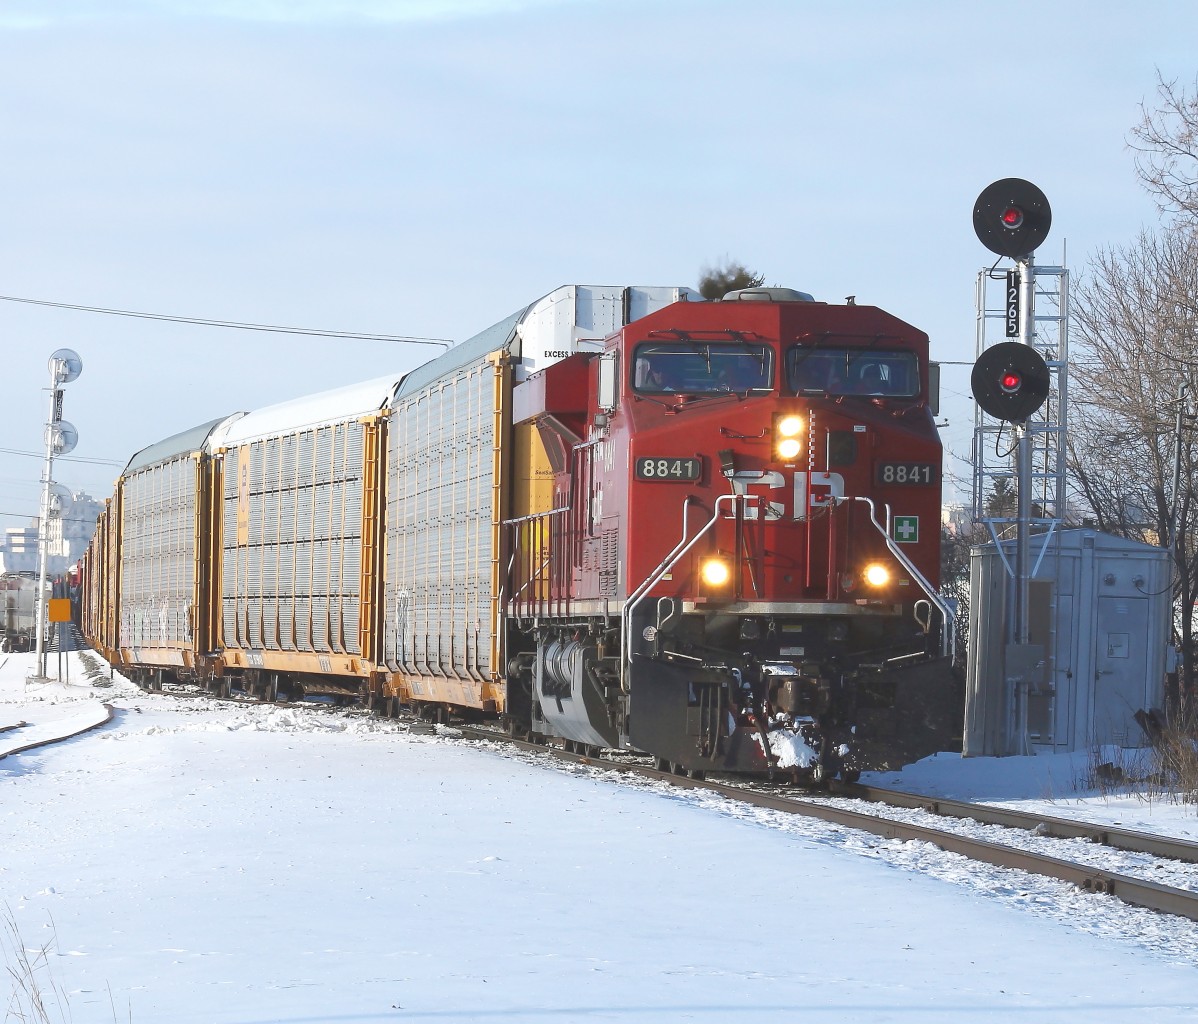 CP train 204 is diverging into the single track Nipigon subdivision at Current River. Remnants of the track to CN's Kinghorn subdivision can be seen to the left. The connecting switch was removed by CP in the fall of 2012 and new signal masts facing both directions were installed at the same time.